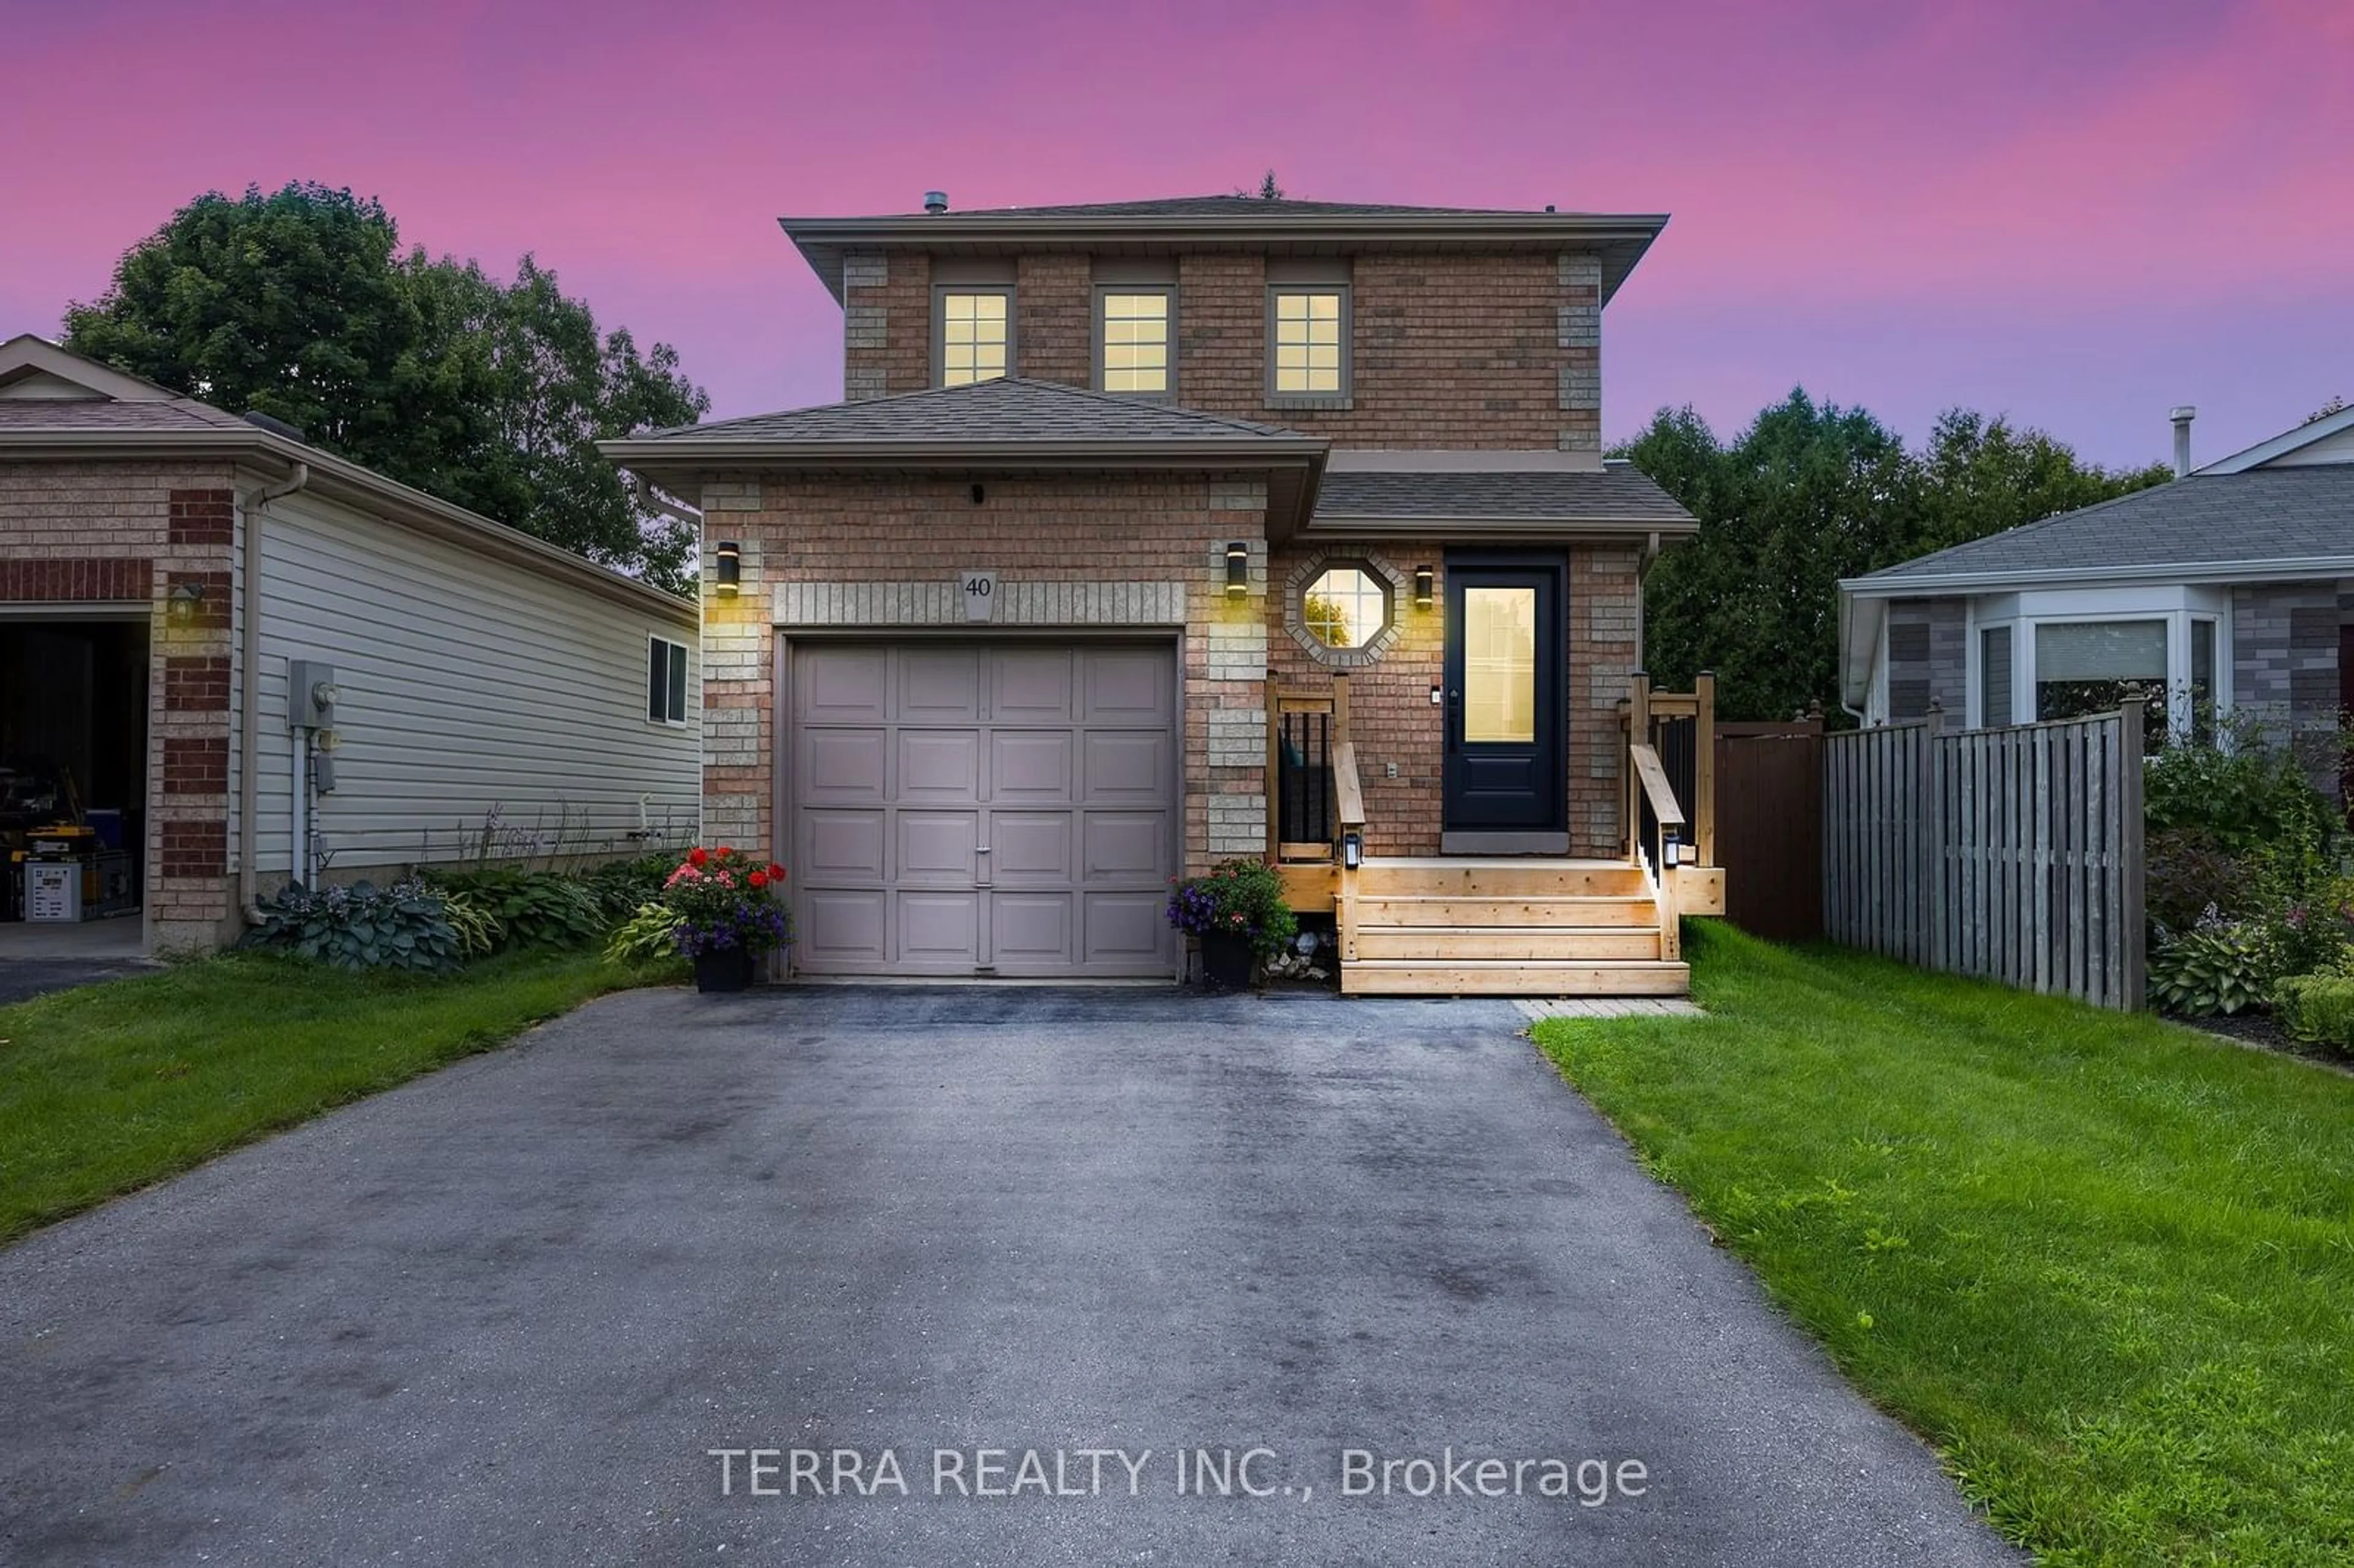 Frontside or backside of a home for 40 Assiniboine Dr, Barrie Ontario L4N 8G4